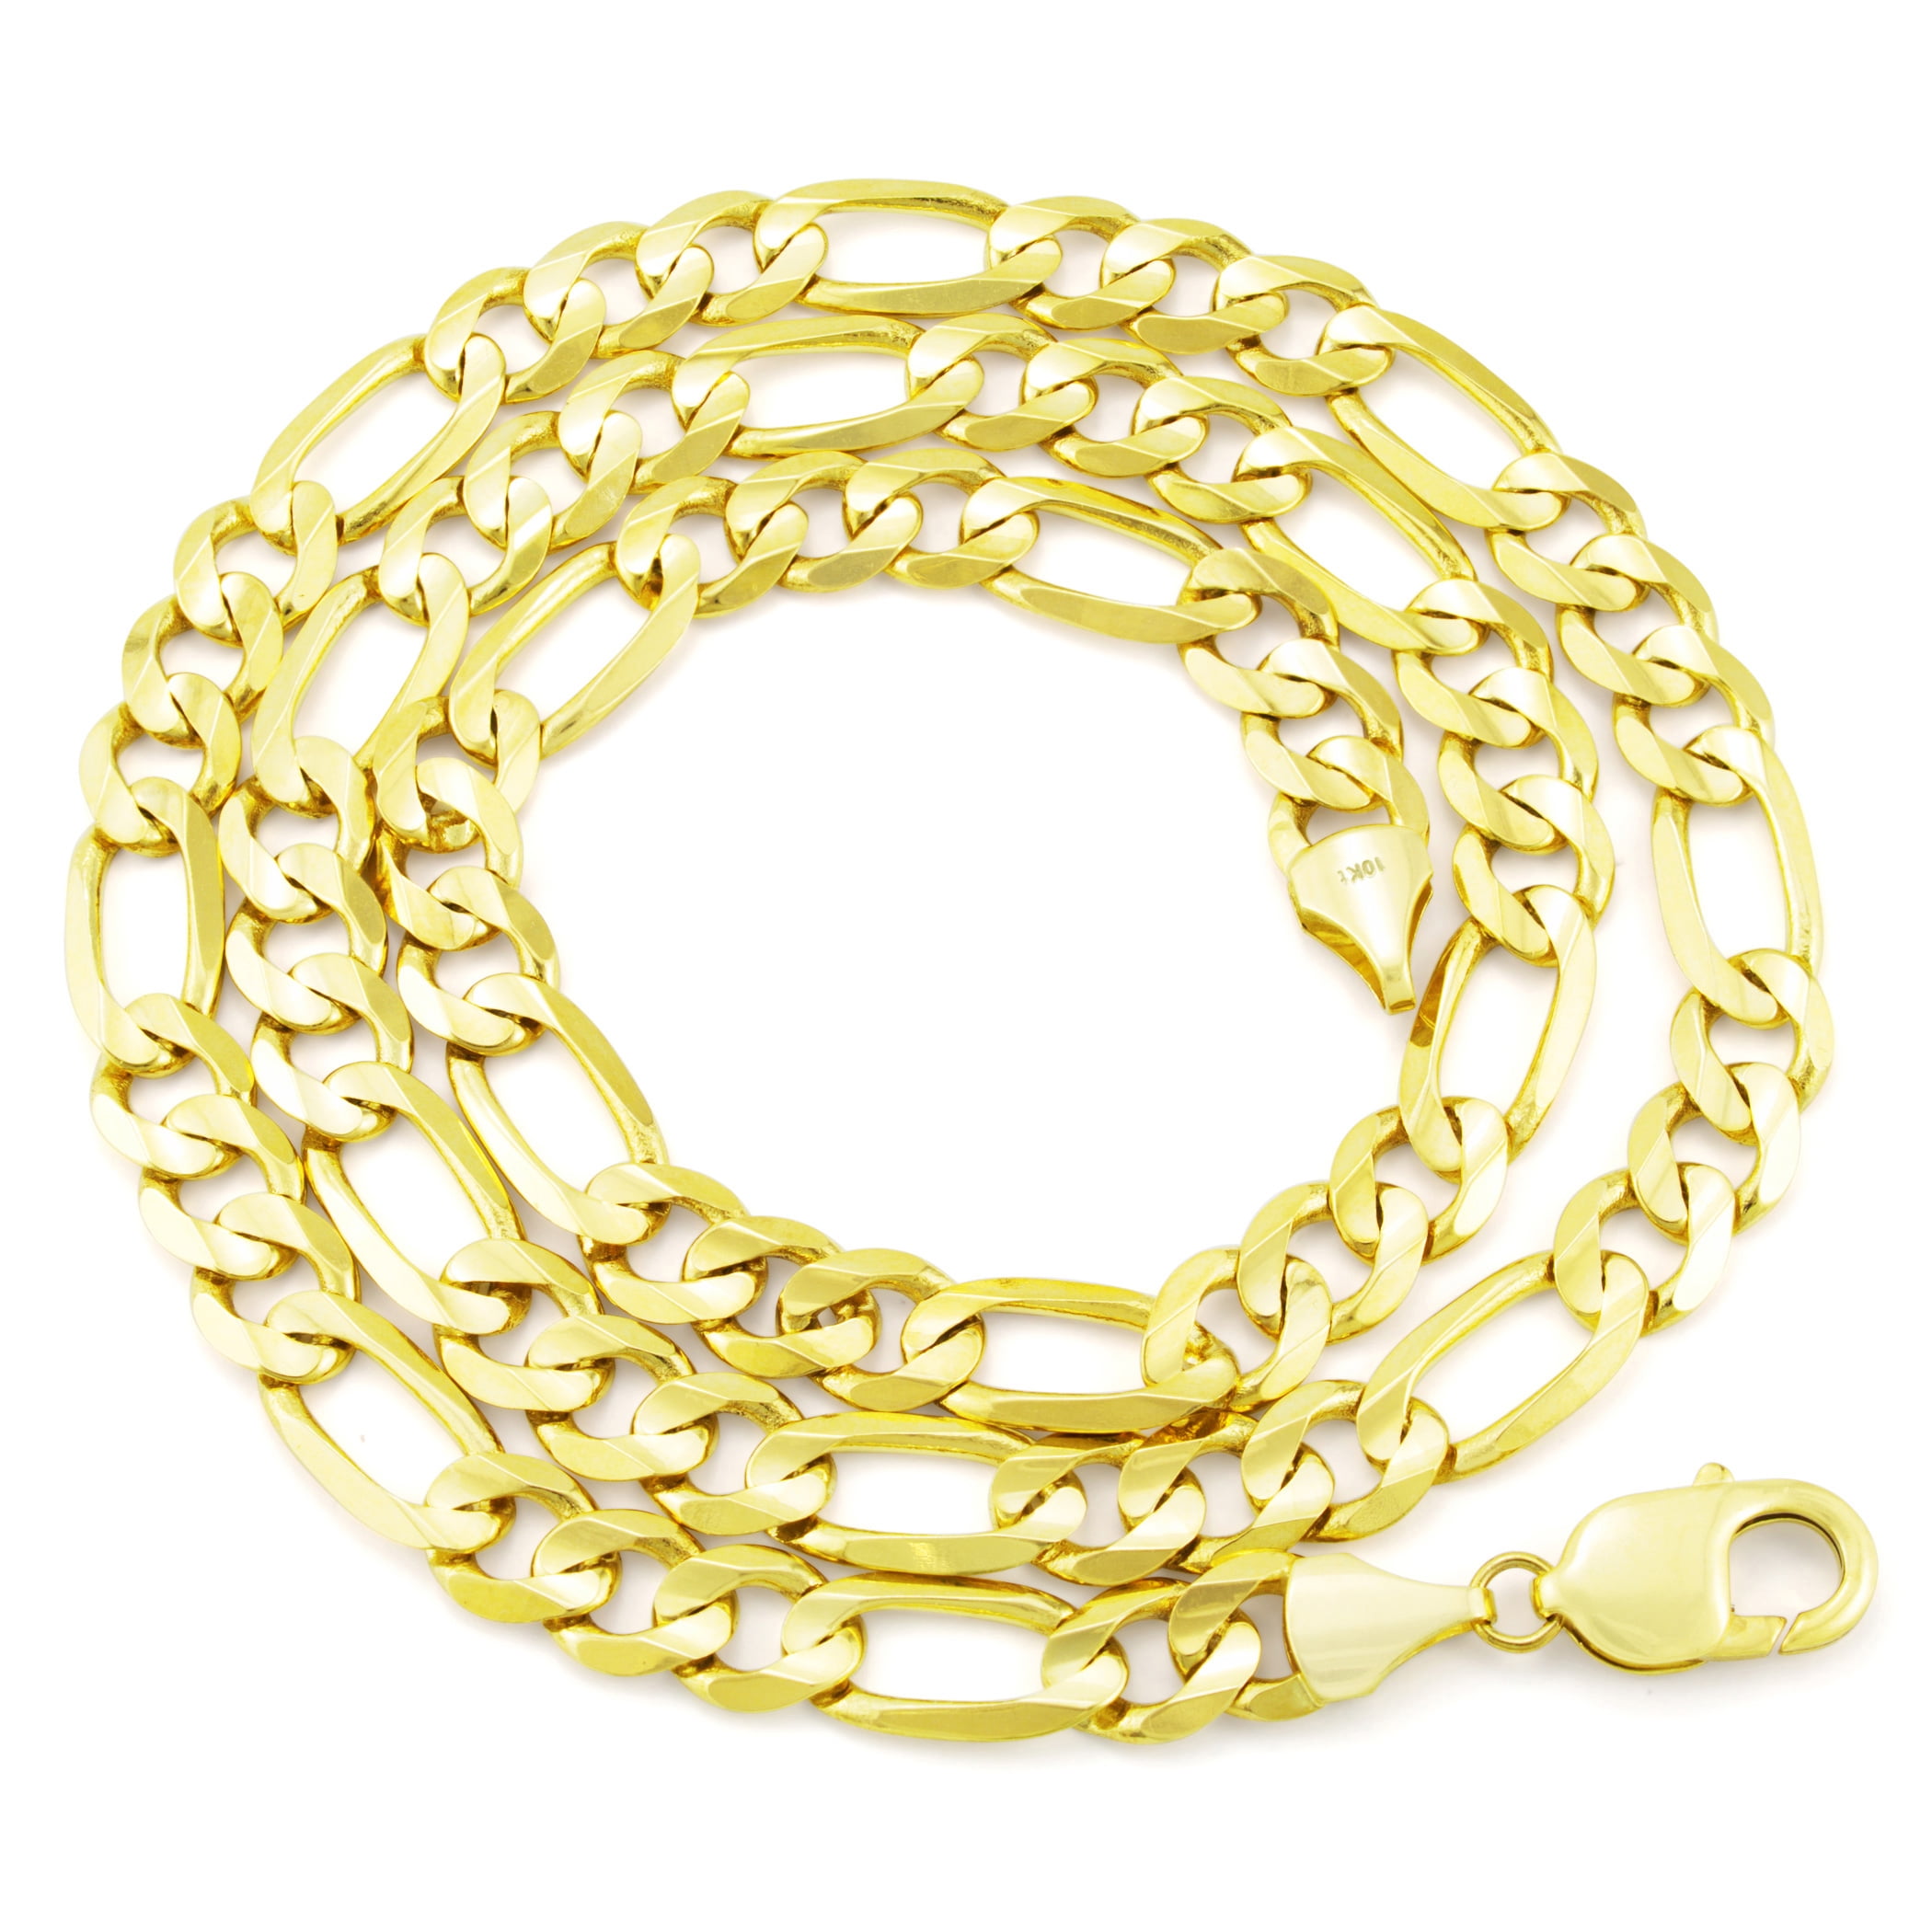 9 mm Figaro Chain Link Necklace for Men Boys Heavy 316L Gold Plated  Stainless Steel Gold Color 24 Inch - TB-TN-0010